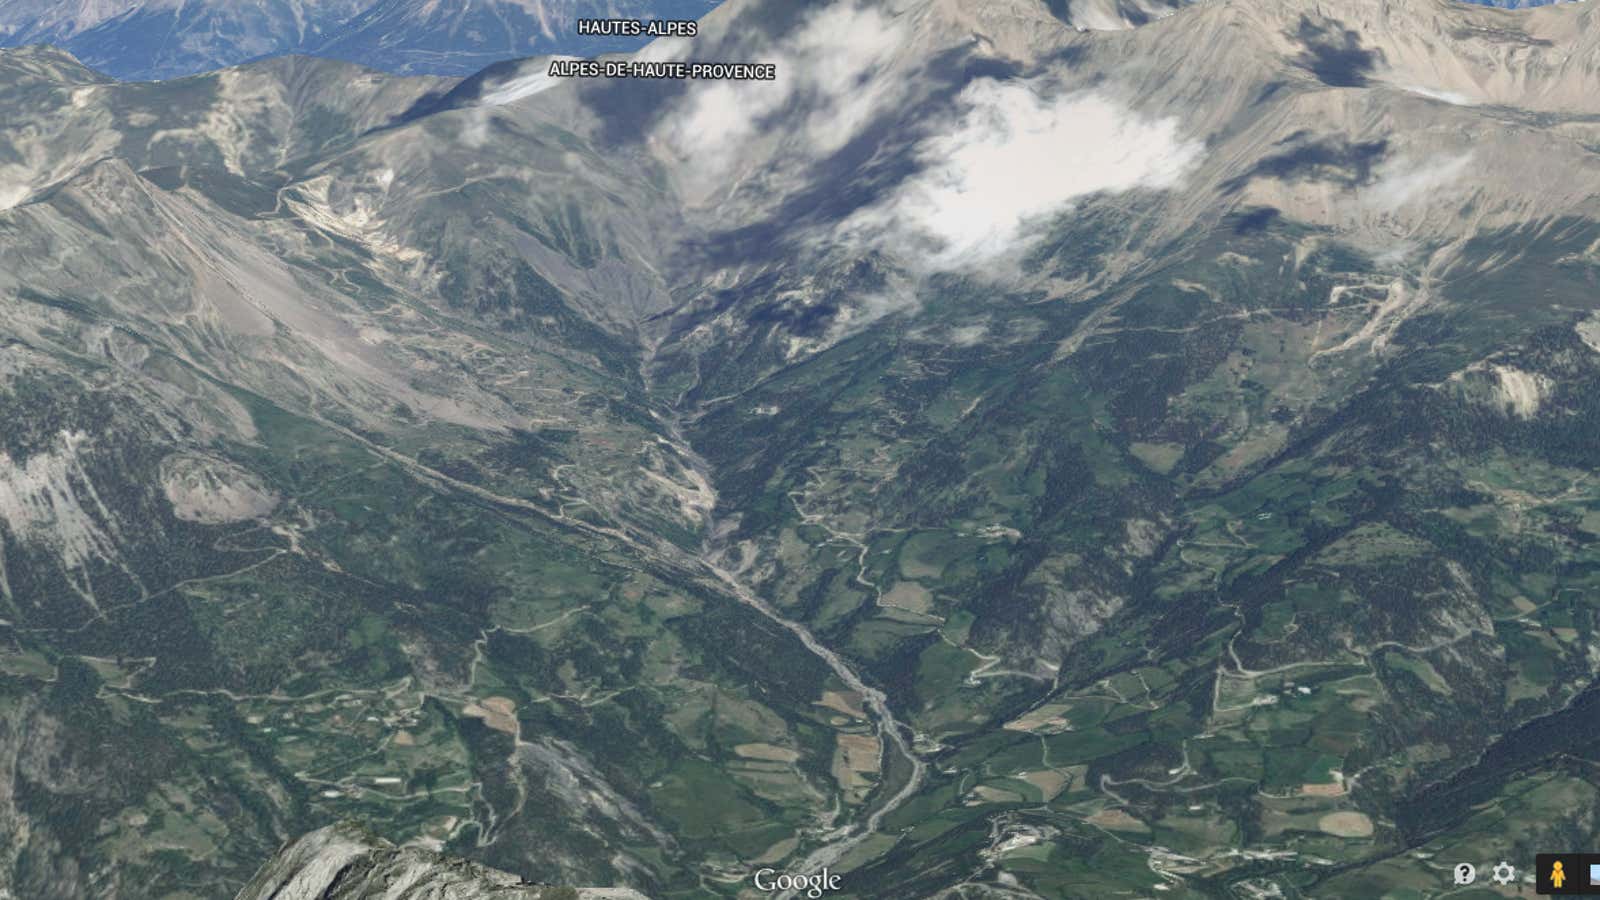 The treacherous and remote location of the Germanwings crash